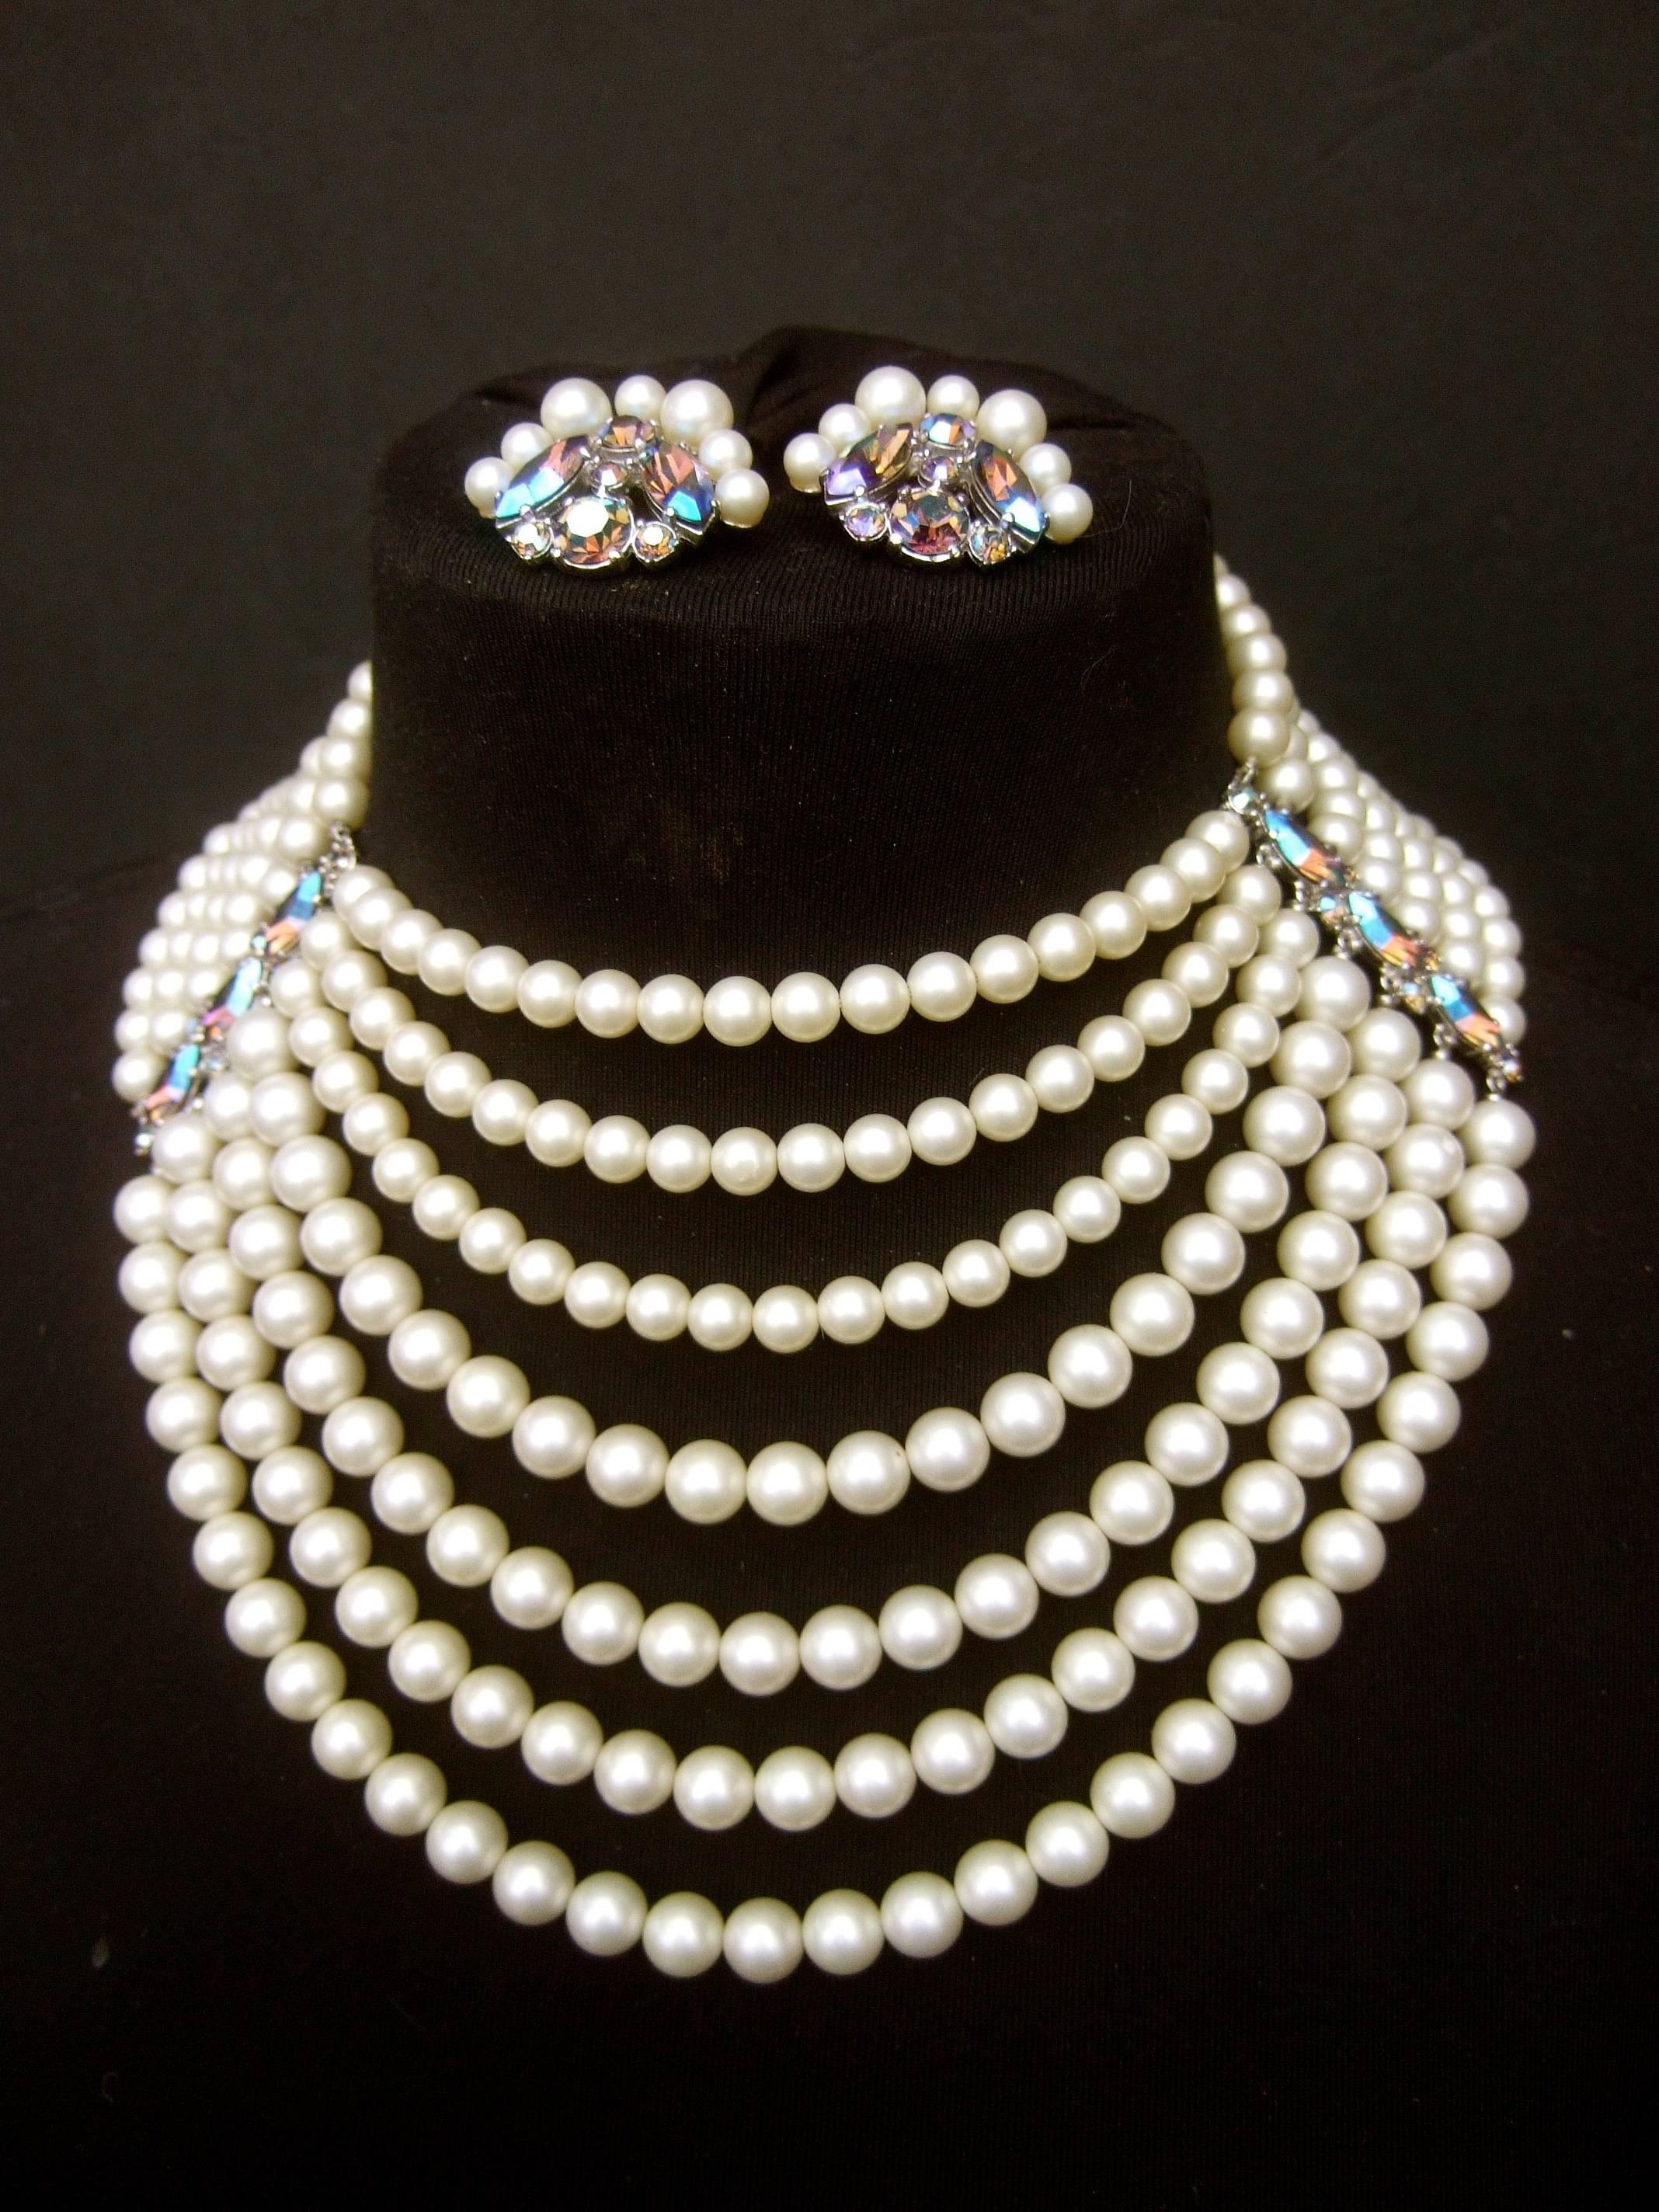 Schiaparelli dramatic multi strand faux pearl necklace - earring set c 1960s
The opulent faux pearl graduated seven strand necklace is designed
with resin enamel pearls. The striking costume necklace is embellished 
with a bar of aurora borealis